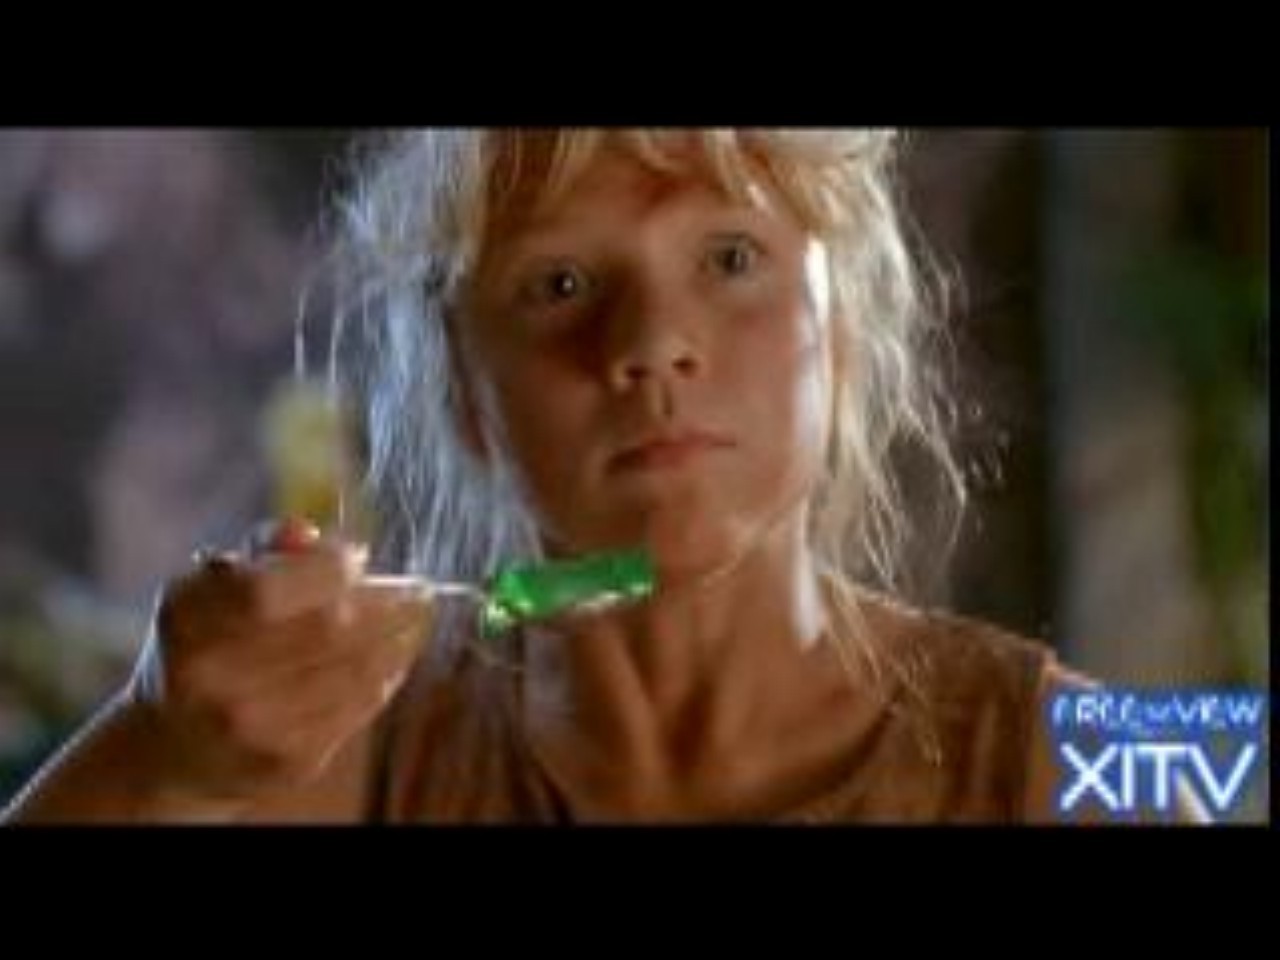 Free Movies Show List #1 Featuring JURASSIC PARK Starring Laura Dern! Watch Many More Great Films On XITV FREE <> VIEW